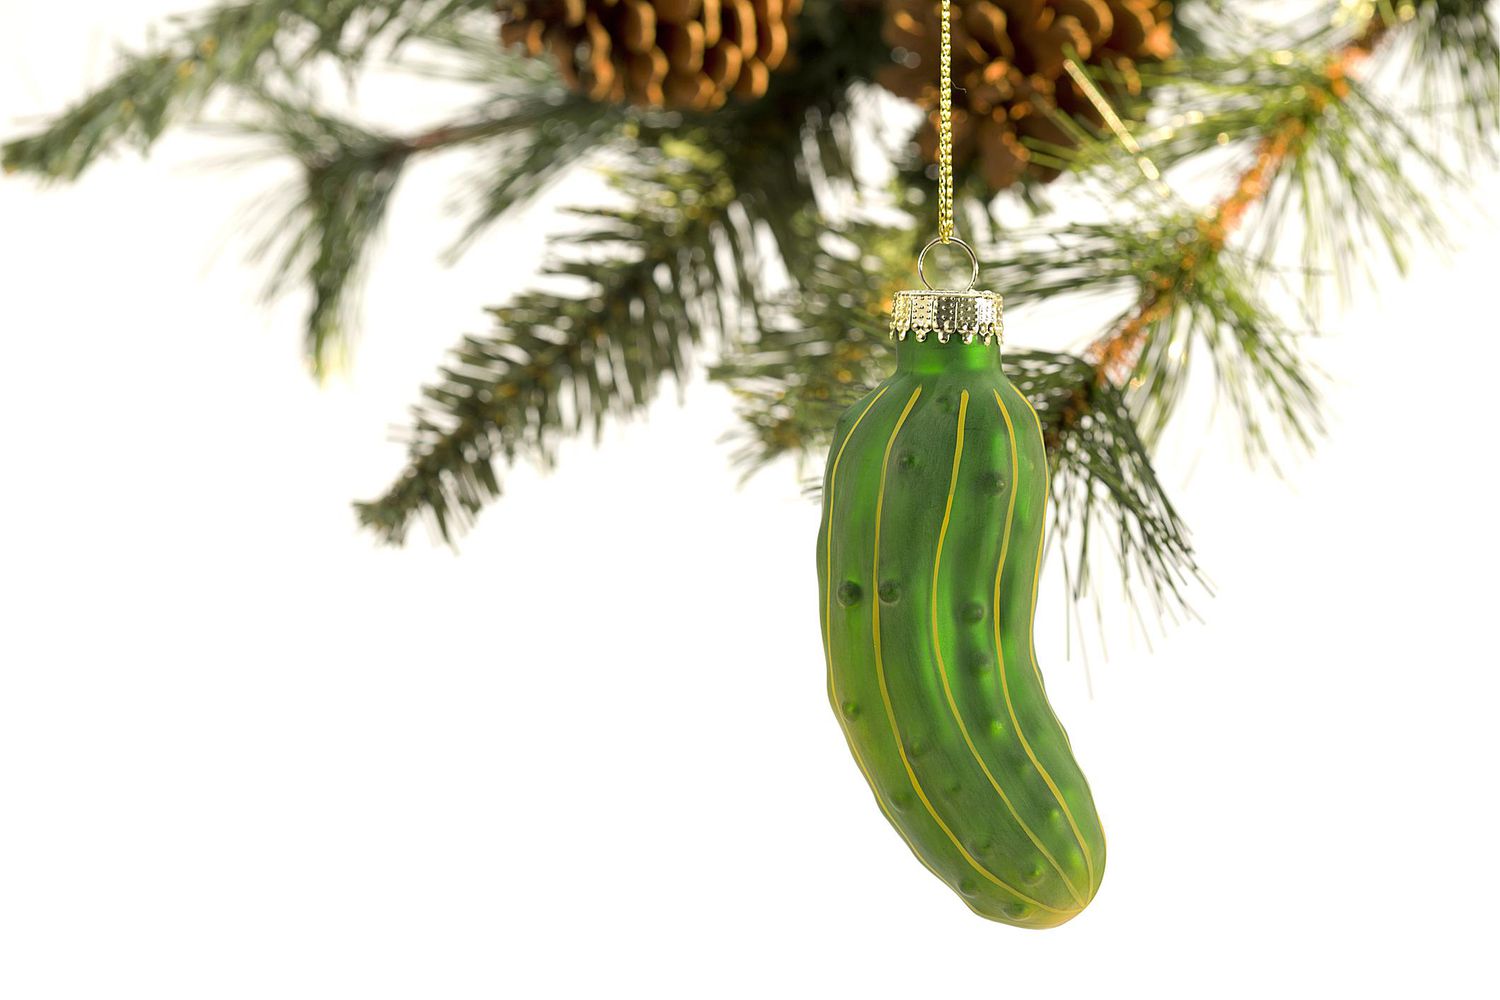 Where To Buy The Christmas Pickle Ornament